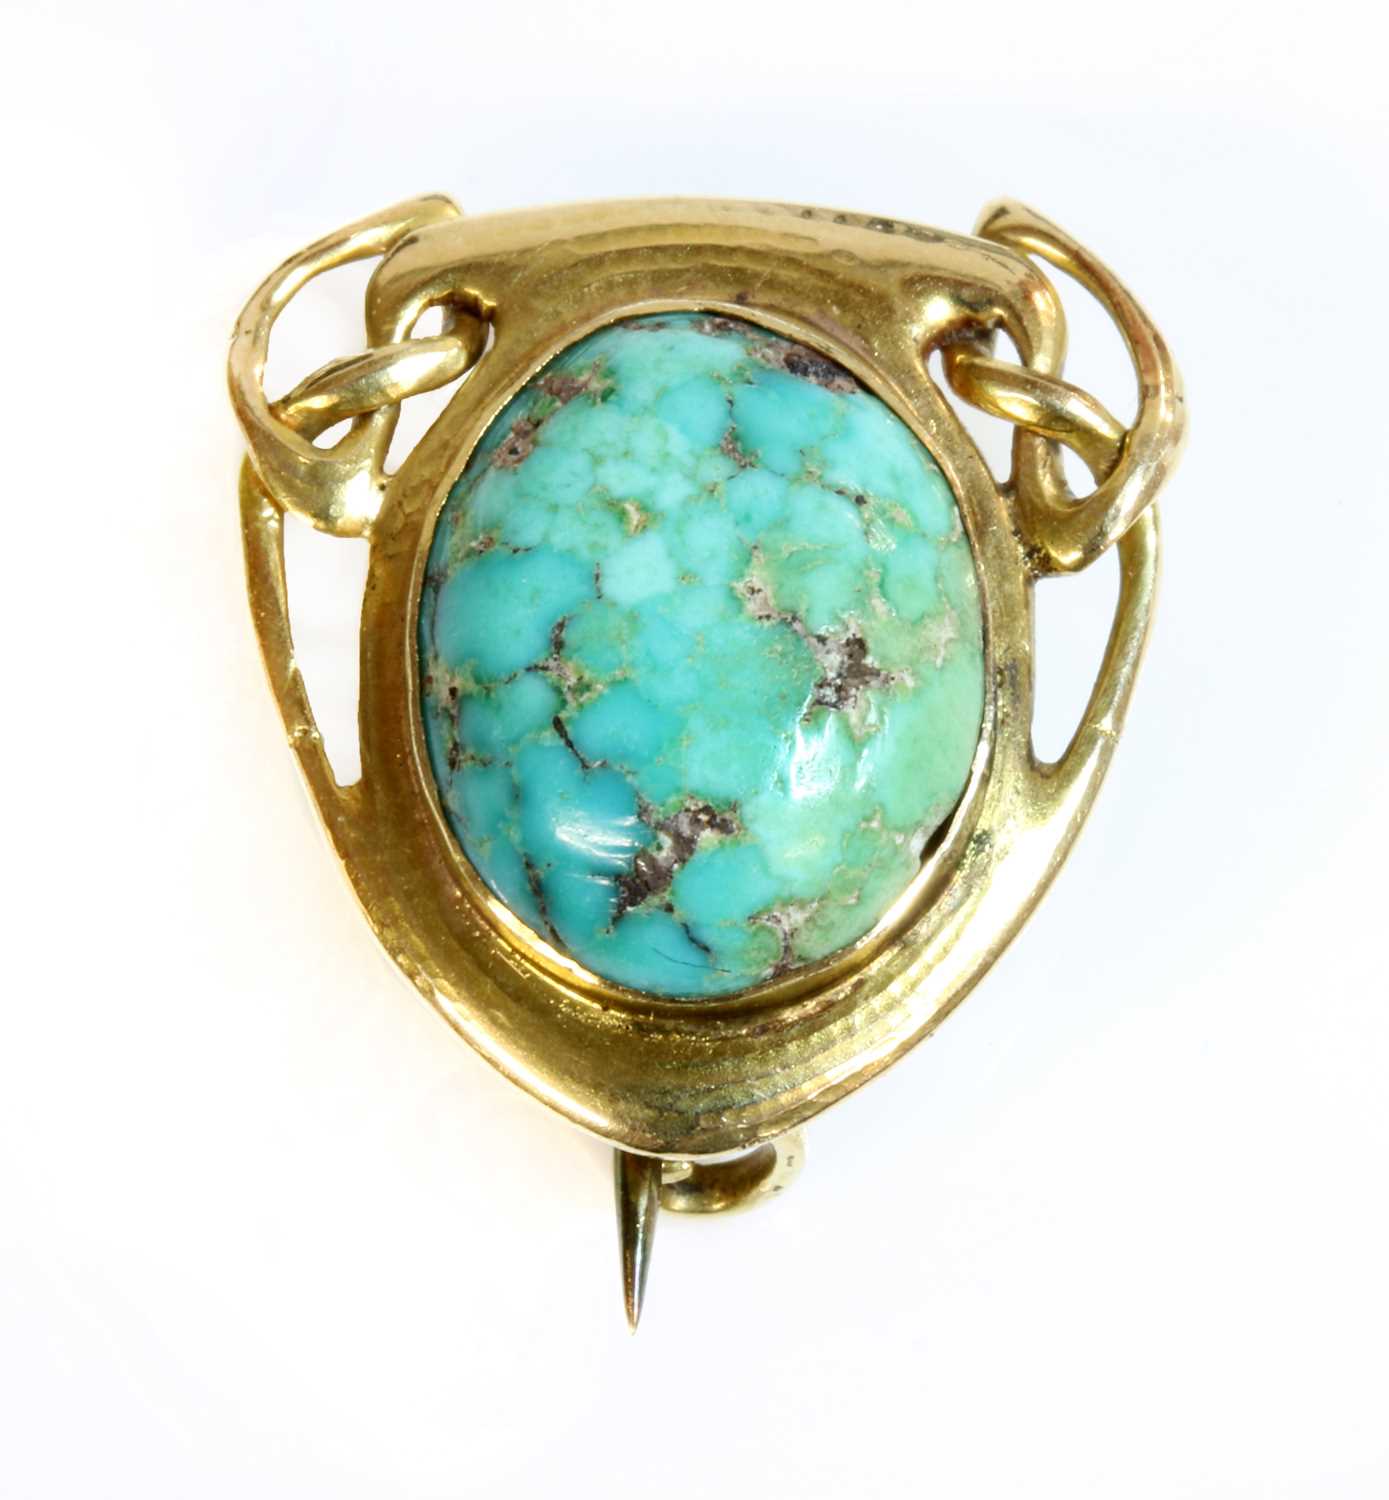 Lot 88 - An Arts & Crafts gold-mounted turquoise brooch, c.1900